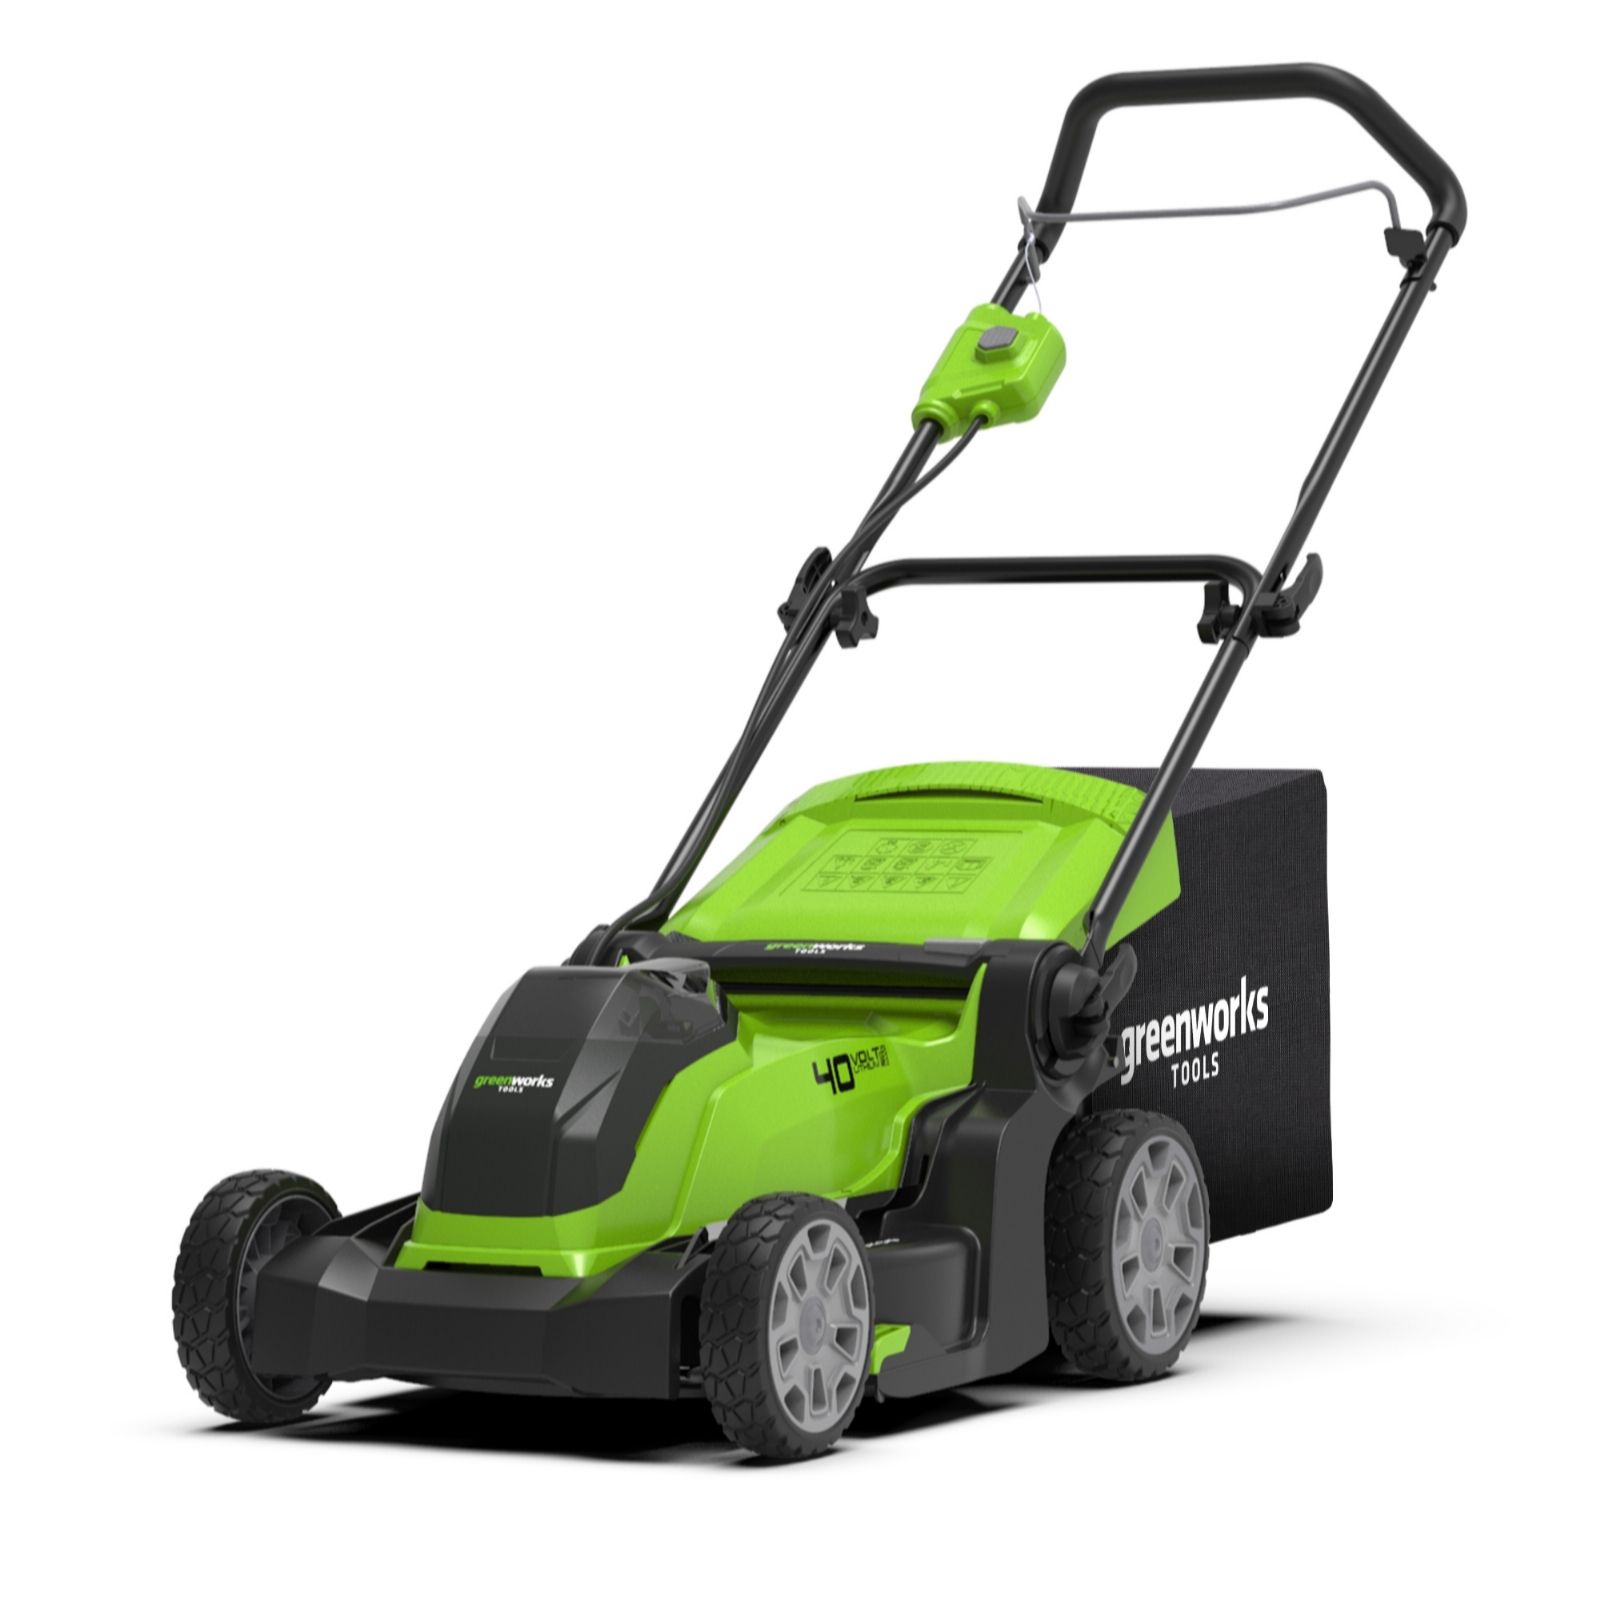 Greenworks 40V 41cm Cordless Lawn Mower with 2.0Ah Battery - QVC UK